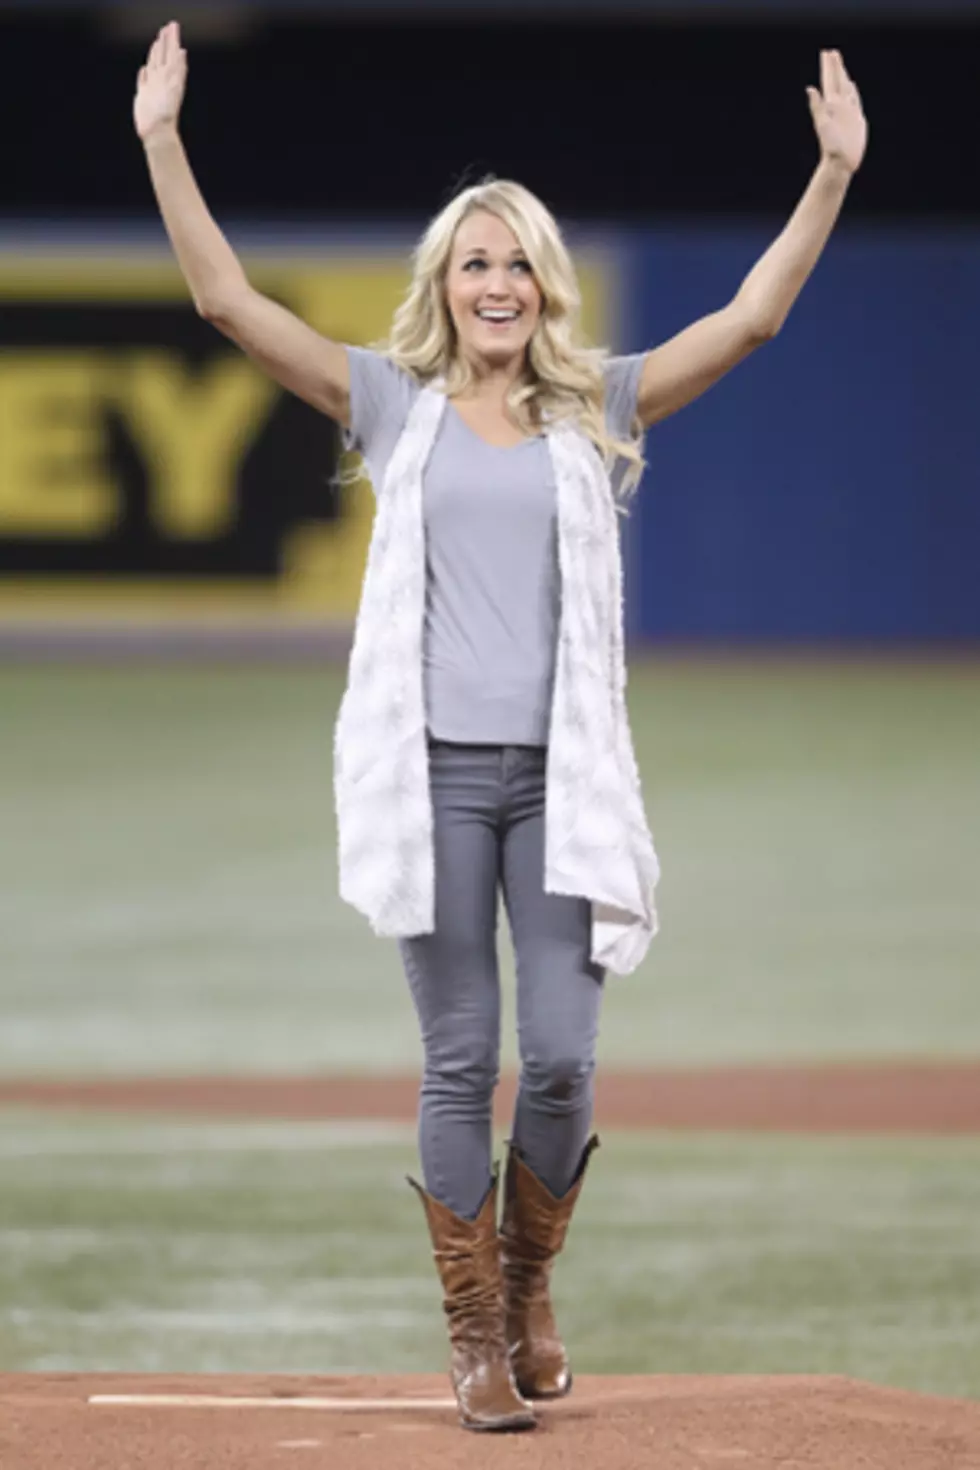 Carrie Underwood Throws the First Pitch at Blue Jays / Yankees Baseball Game